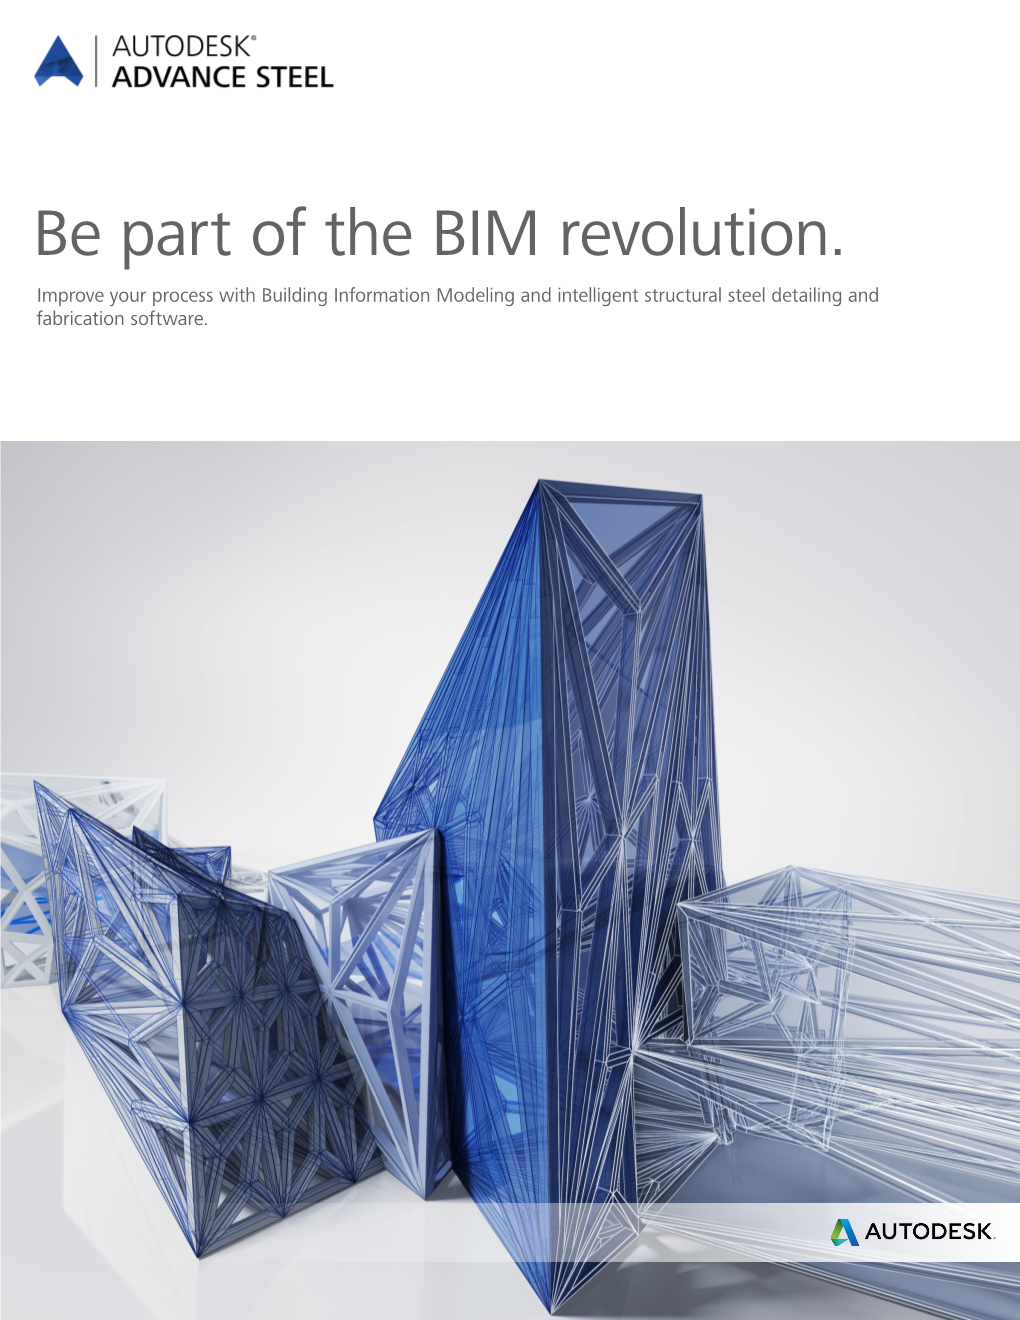 Be Part of the BIM Revolution. Improve Your Process with Building Information Modeling and Intelligent Structural Steel Detailing and Fabrication Software